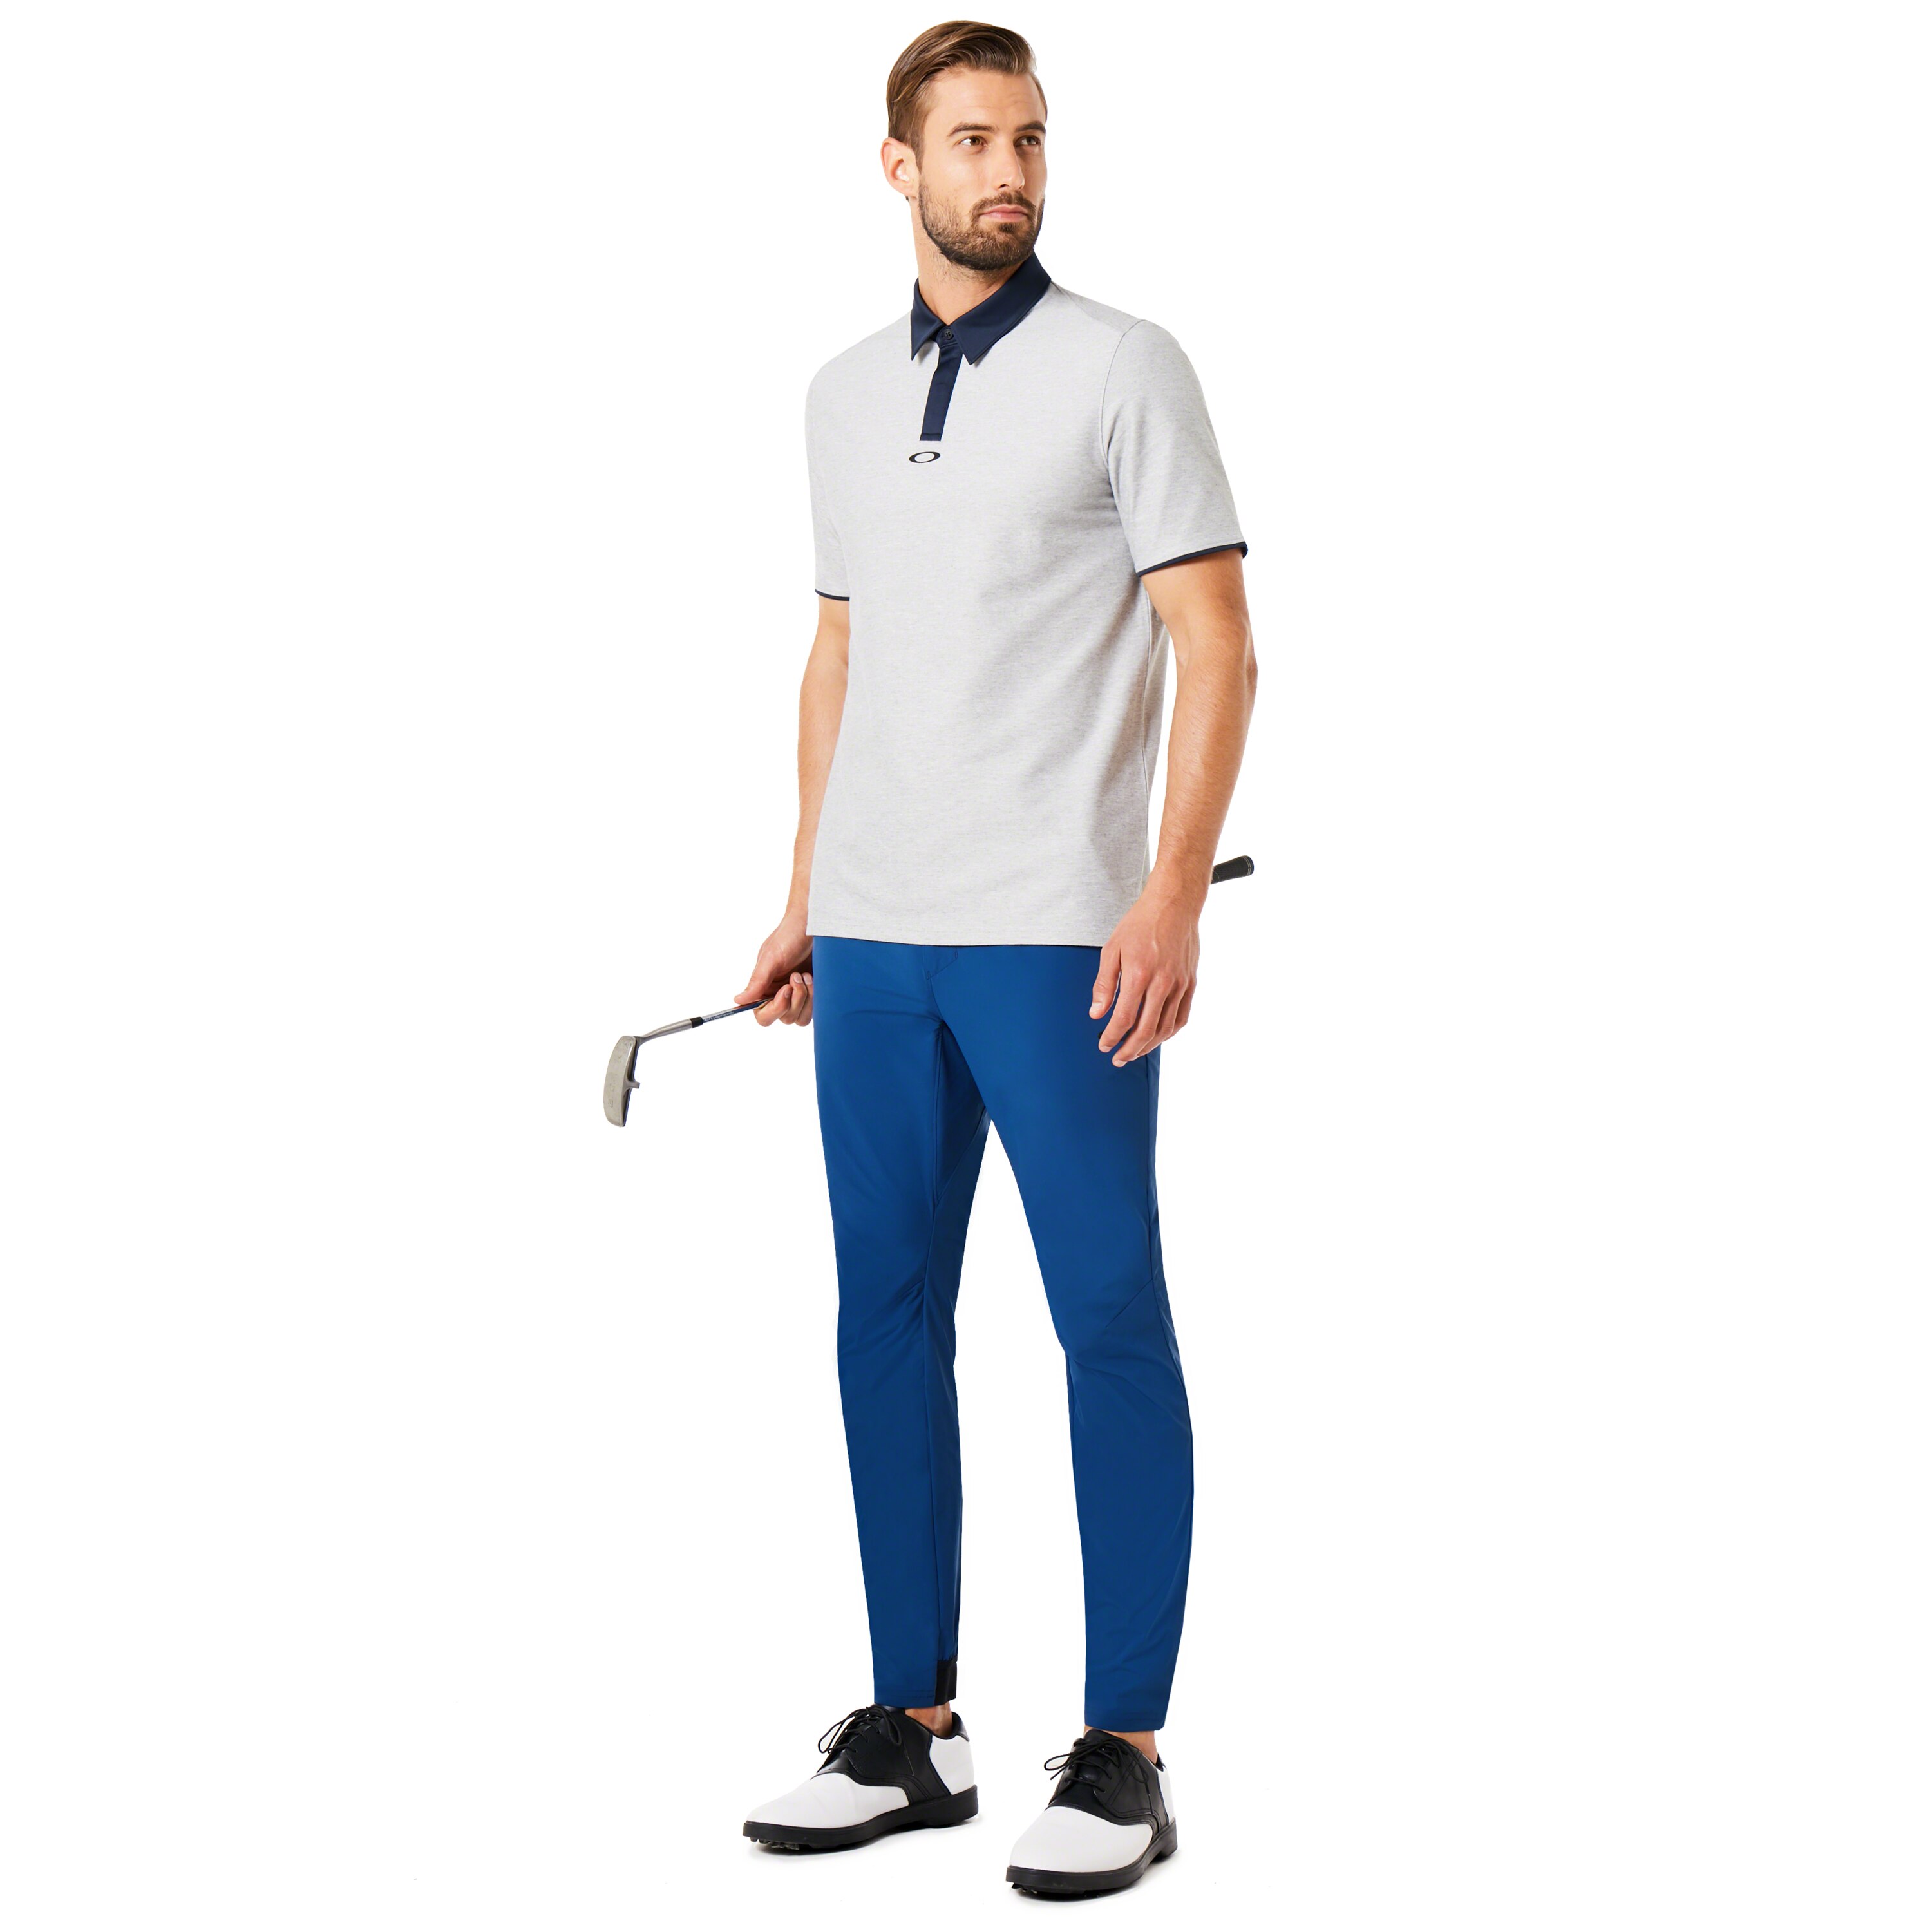 tapered golf pants